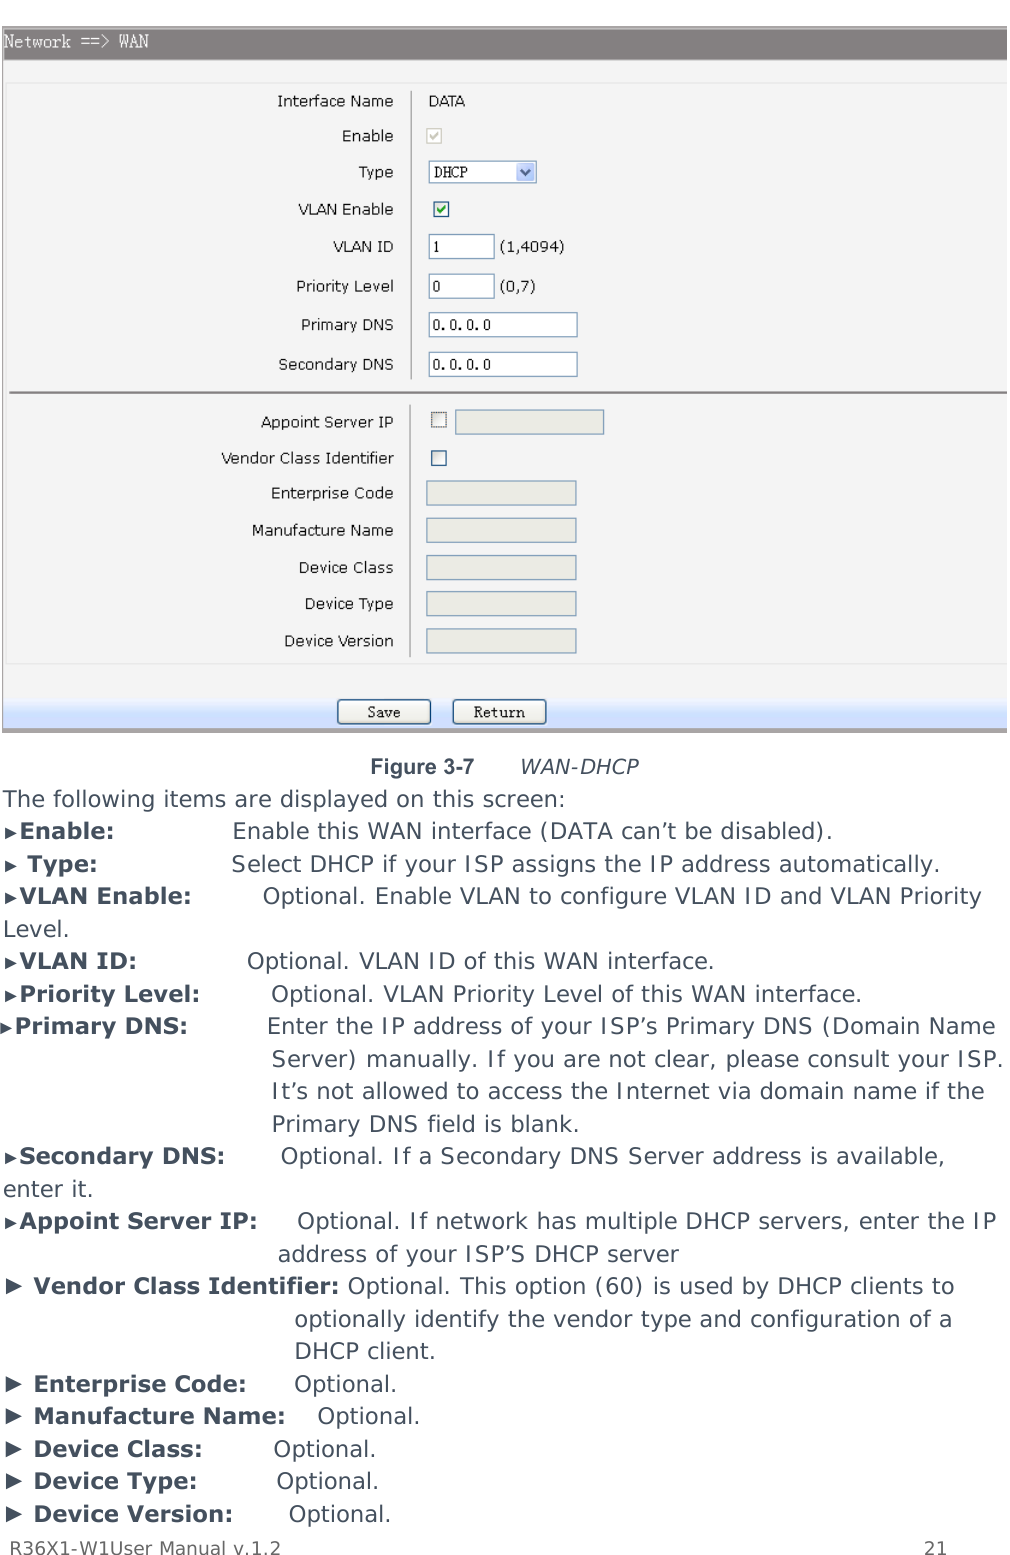           R36X1-W1User Manual v.1.2    21   Figure 3-7  WAN-DHCP The following items are displayed on this screen: ►Enable:               Enable this WAN interface (DATA can’t be disabled). ► Type:                 Select DHCP if your ISP assigns the IP address automatically. ►VLAN Enable:         Optional. Enable VLAN to configure VLAN ID and VLAN Priority Level. ►VLAN ID:              Optional. VLAN ID of this WAN interface. ►Priority Level:         Optional. VLAN Priority Level of this WAN interface. ►Primary DNS:          Enter the IP address of your ISP’s Primary DNS (Domain Name Server) manually. If you are not clear, please consult your ISP. It’s not allowed to access the Internet via domain name if the Primary DNS field is blank. ►Secondary DNS:       Optional. If a Secondary DNS Server address is available, enter it. ►Appoint Server IP:     Optional. If network has multiple DHCP servers, enter the IP address of your ISP’S DHCP server ► Vendor Class Identifier: Optional. This option (60) is used by DHCP clients to optionally identify the vendor type and configuration of a DHCP client. ► Enterprise Code:      Optional. ► Manufacture Name:    Optional. ► Device Class:         Optional. ► Device Type:          Optional. ► Device Version:       Optional. 